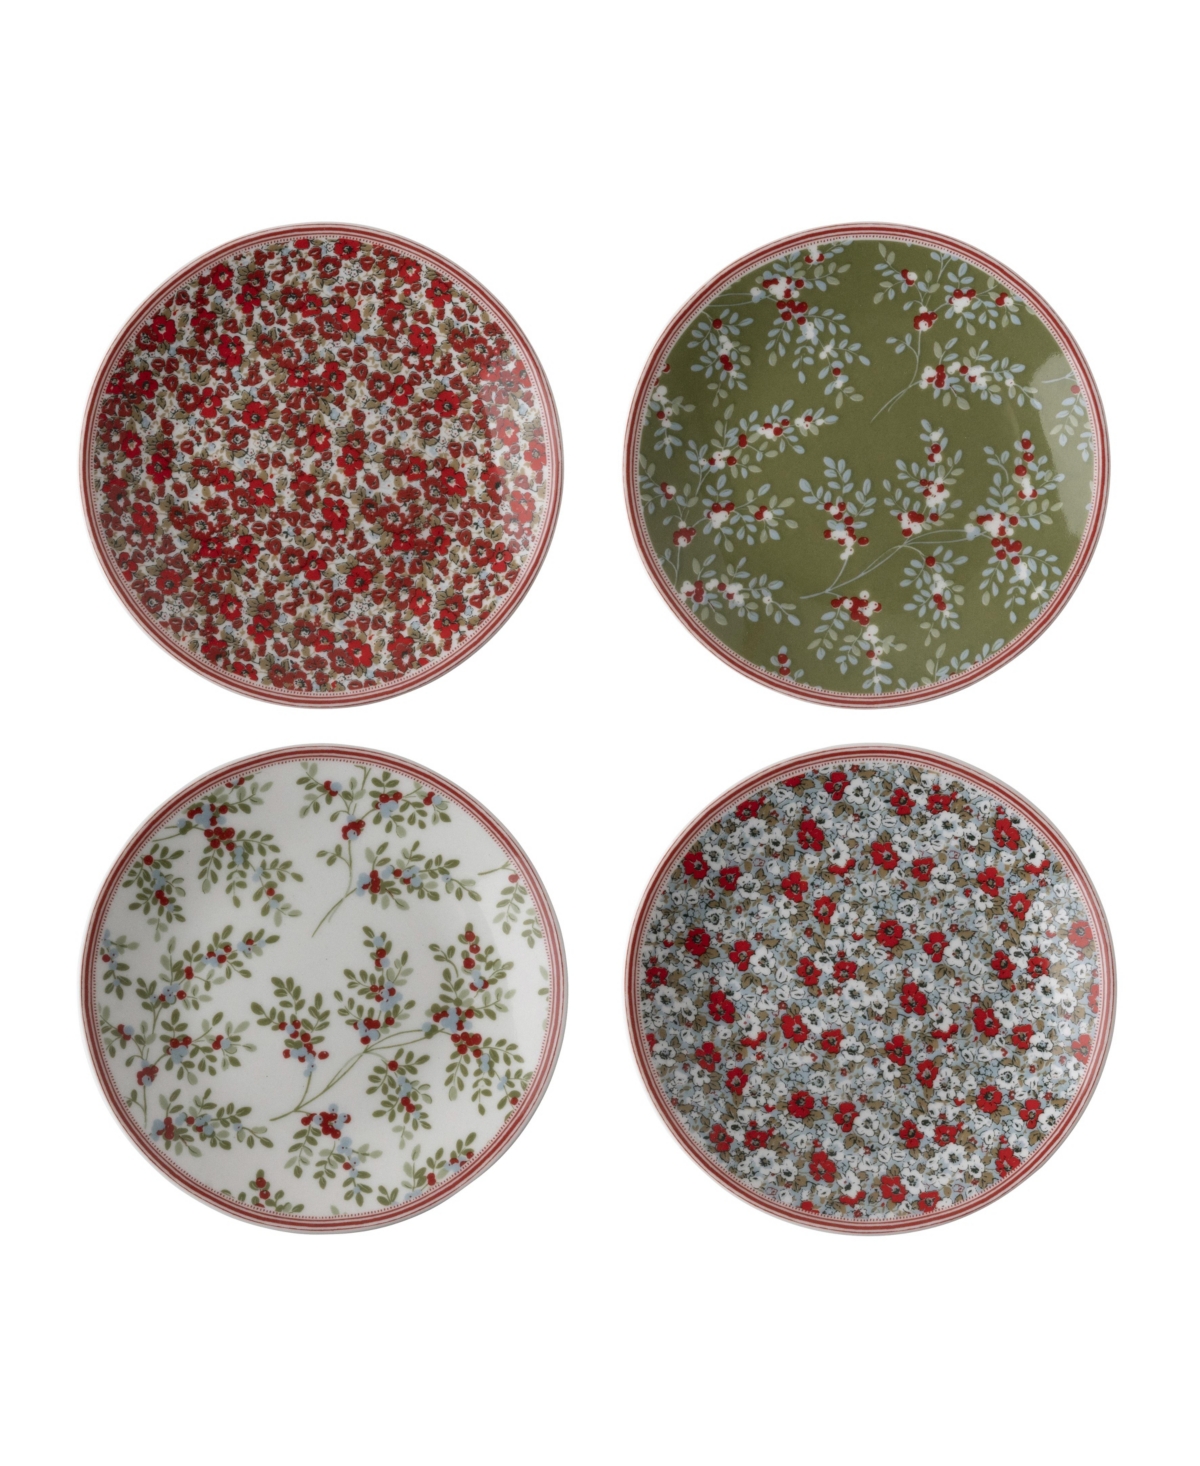 Laura Ashley Petit Plates Stockbridge Collectables Gift Set, 4 Piece In Mixed